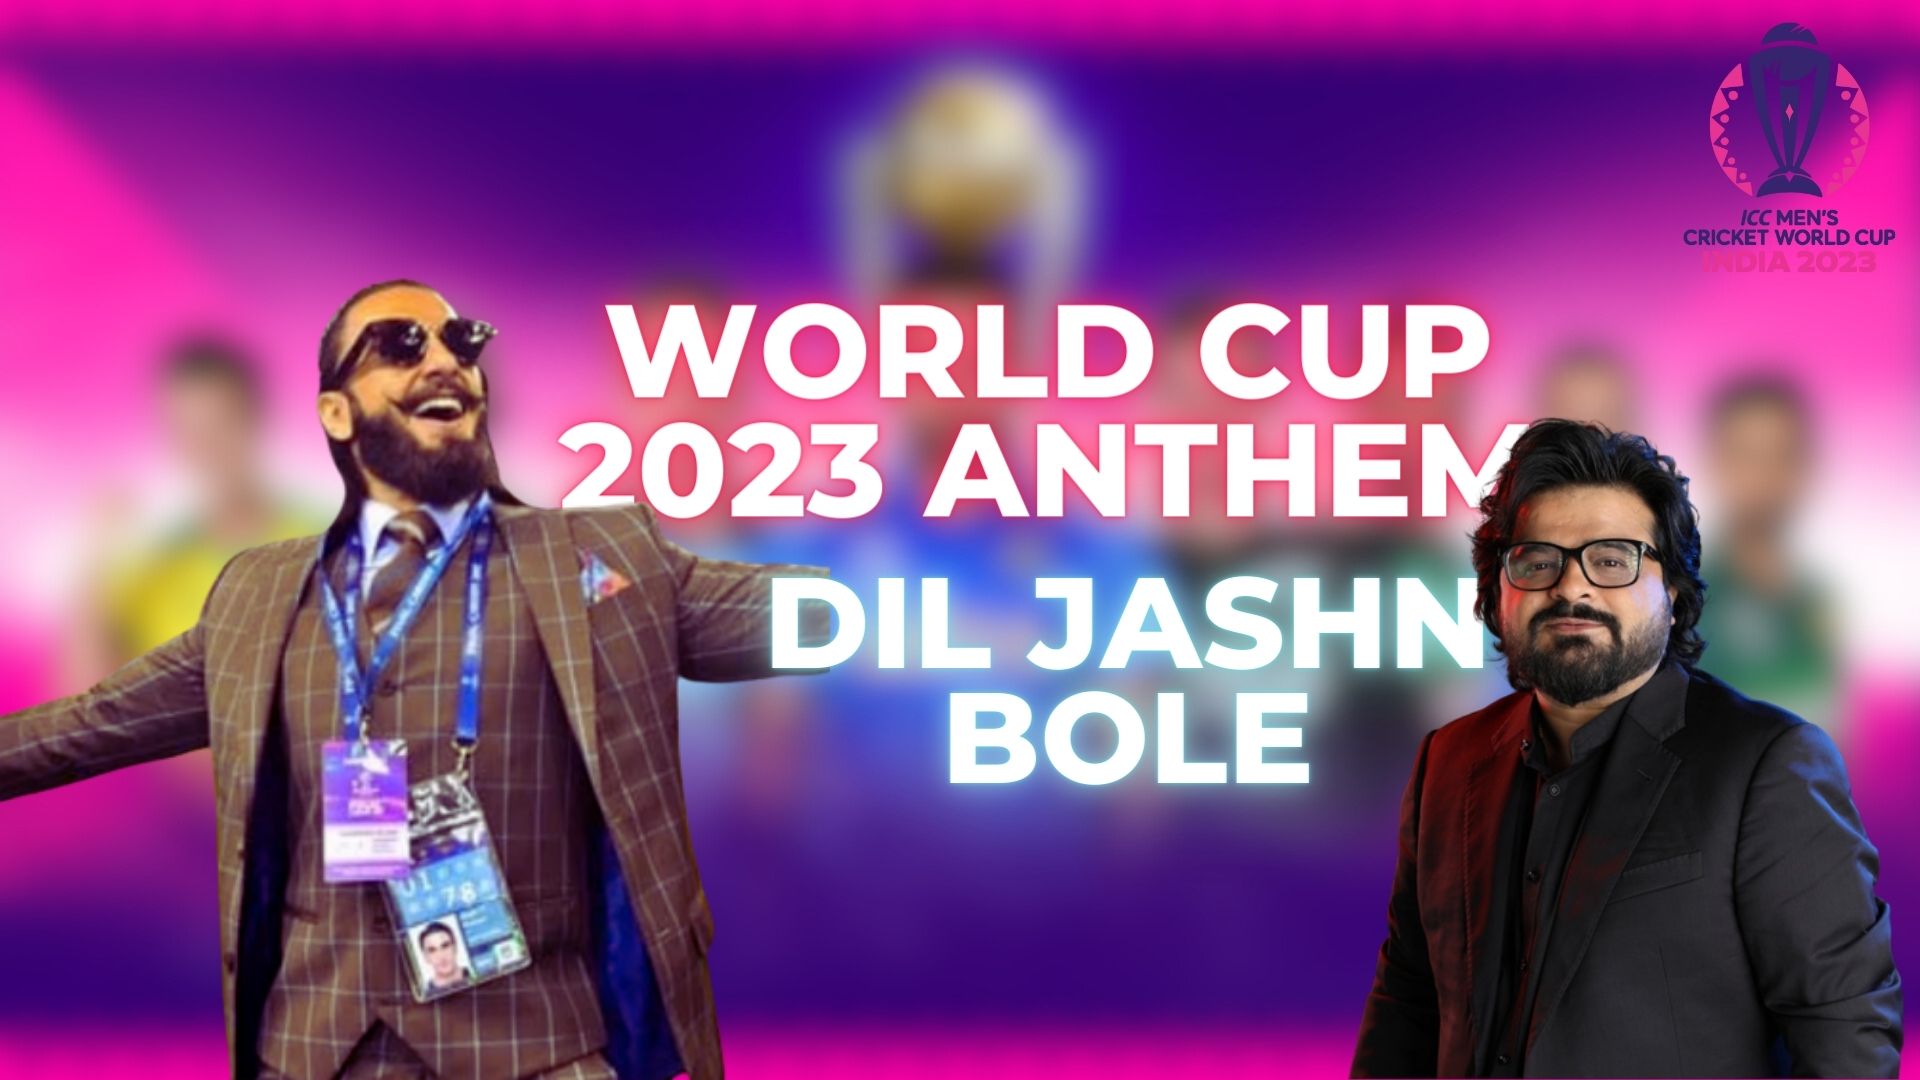 Ranveer Singh and Pritam's "Dil Jashn Bole": A World Cup Anthem That Will Get You Moving